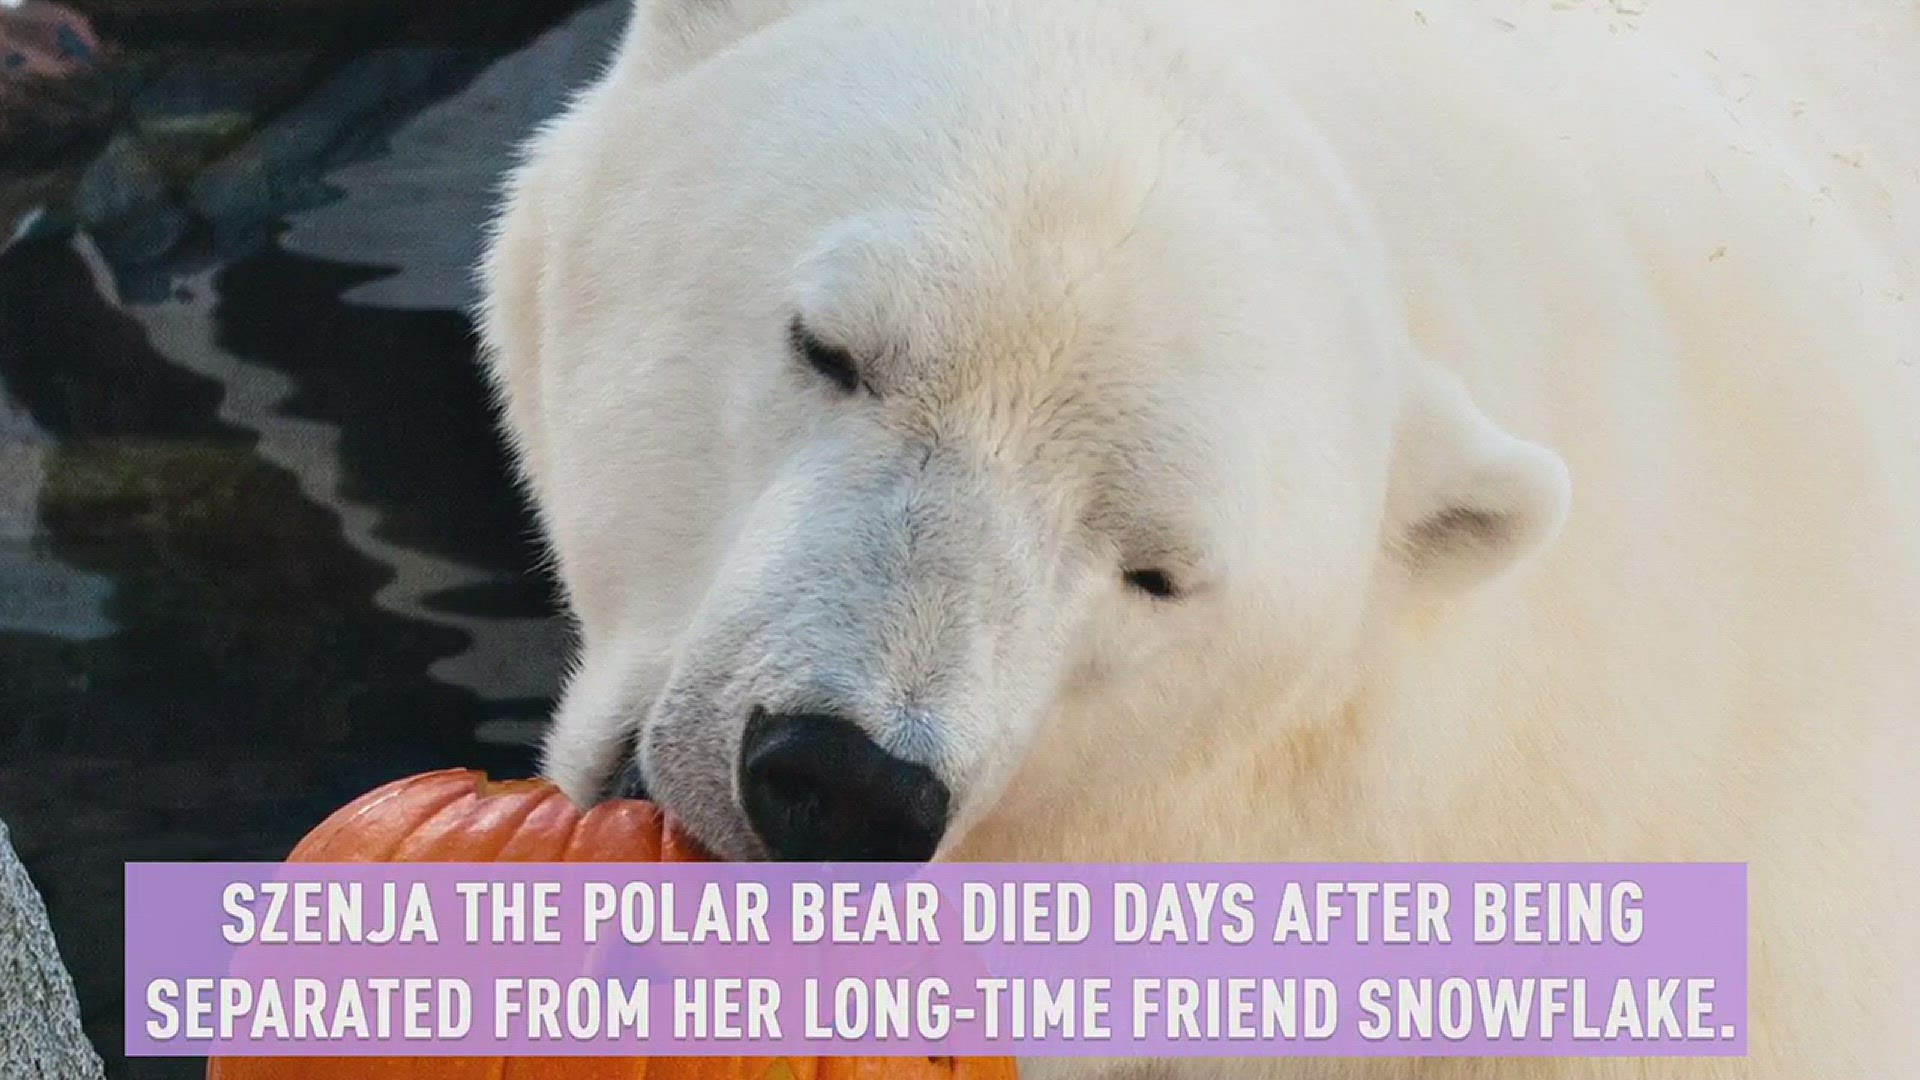 Animal Bear Sex Hd - PETA claims polar bear died of 'heartbreak' after being separated from  'same-sex' partner | thv11.com